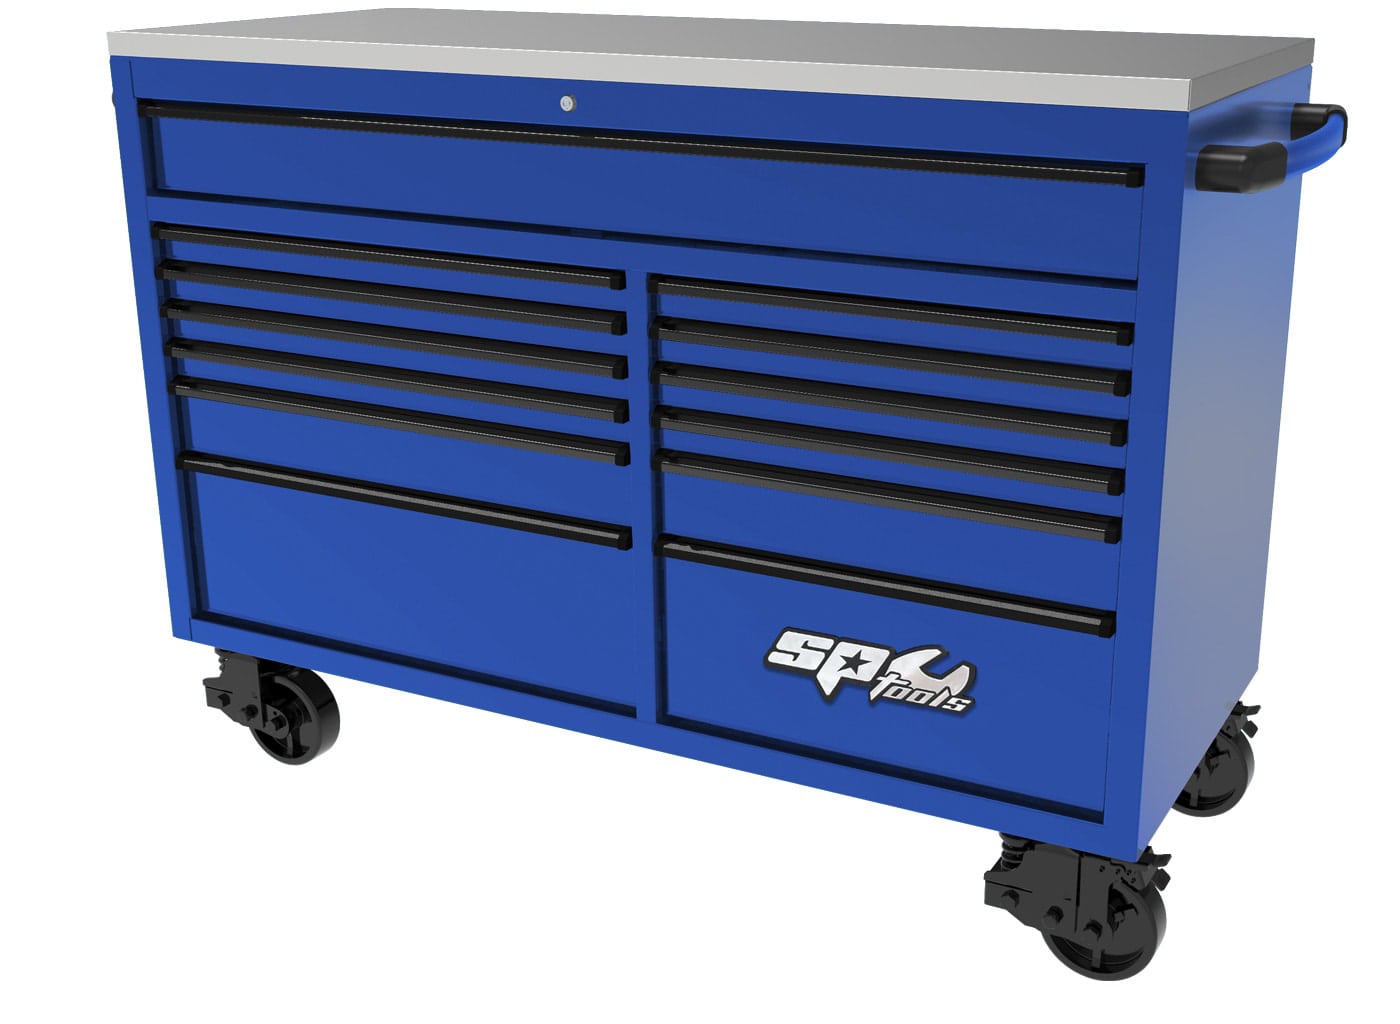 59" USA SUMO Series Wide Roller Cabinet, 13 Drawer by SP Tools